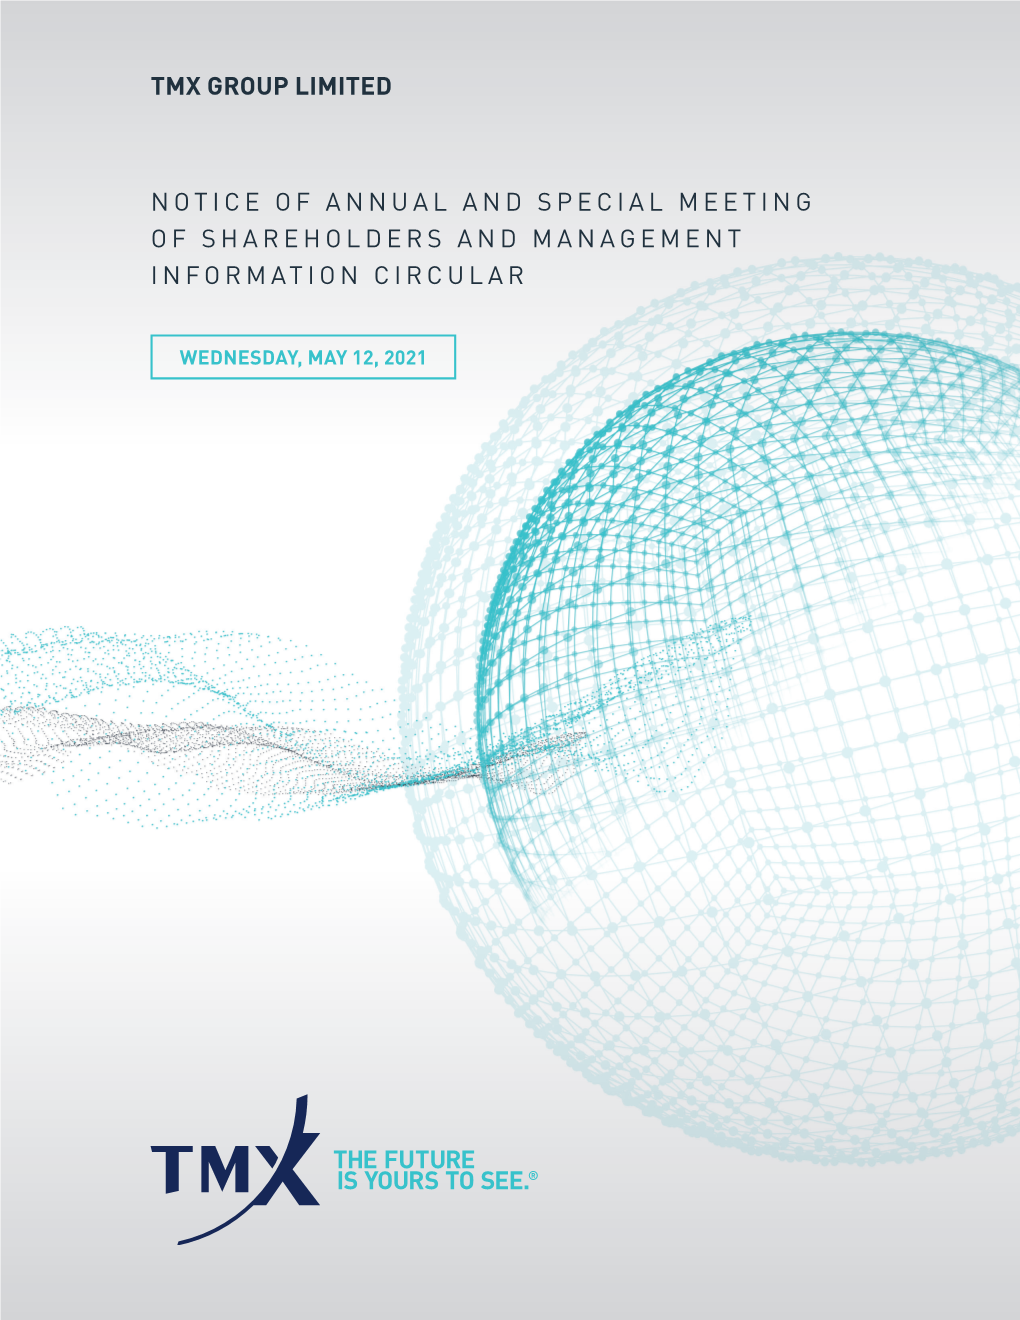 Management Information Circular for Annual Meeting May 12, 2021